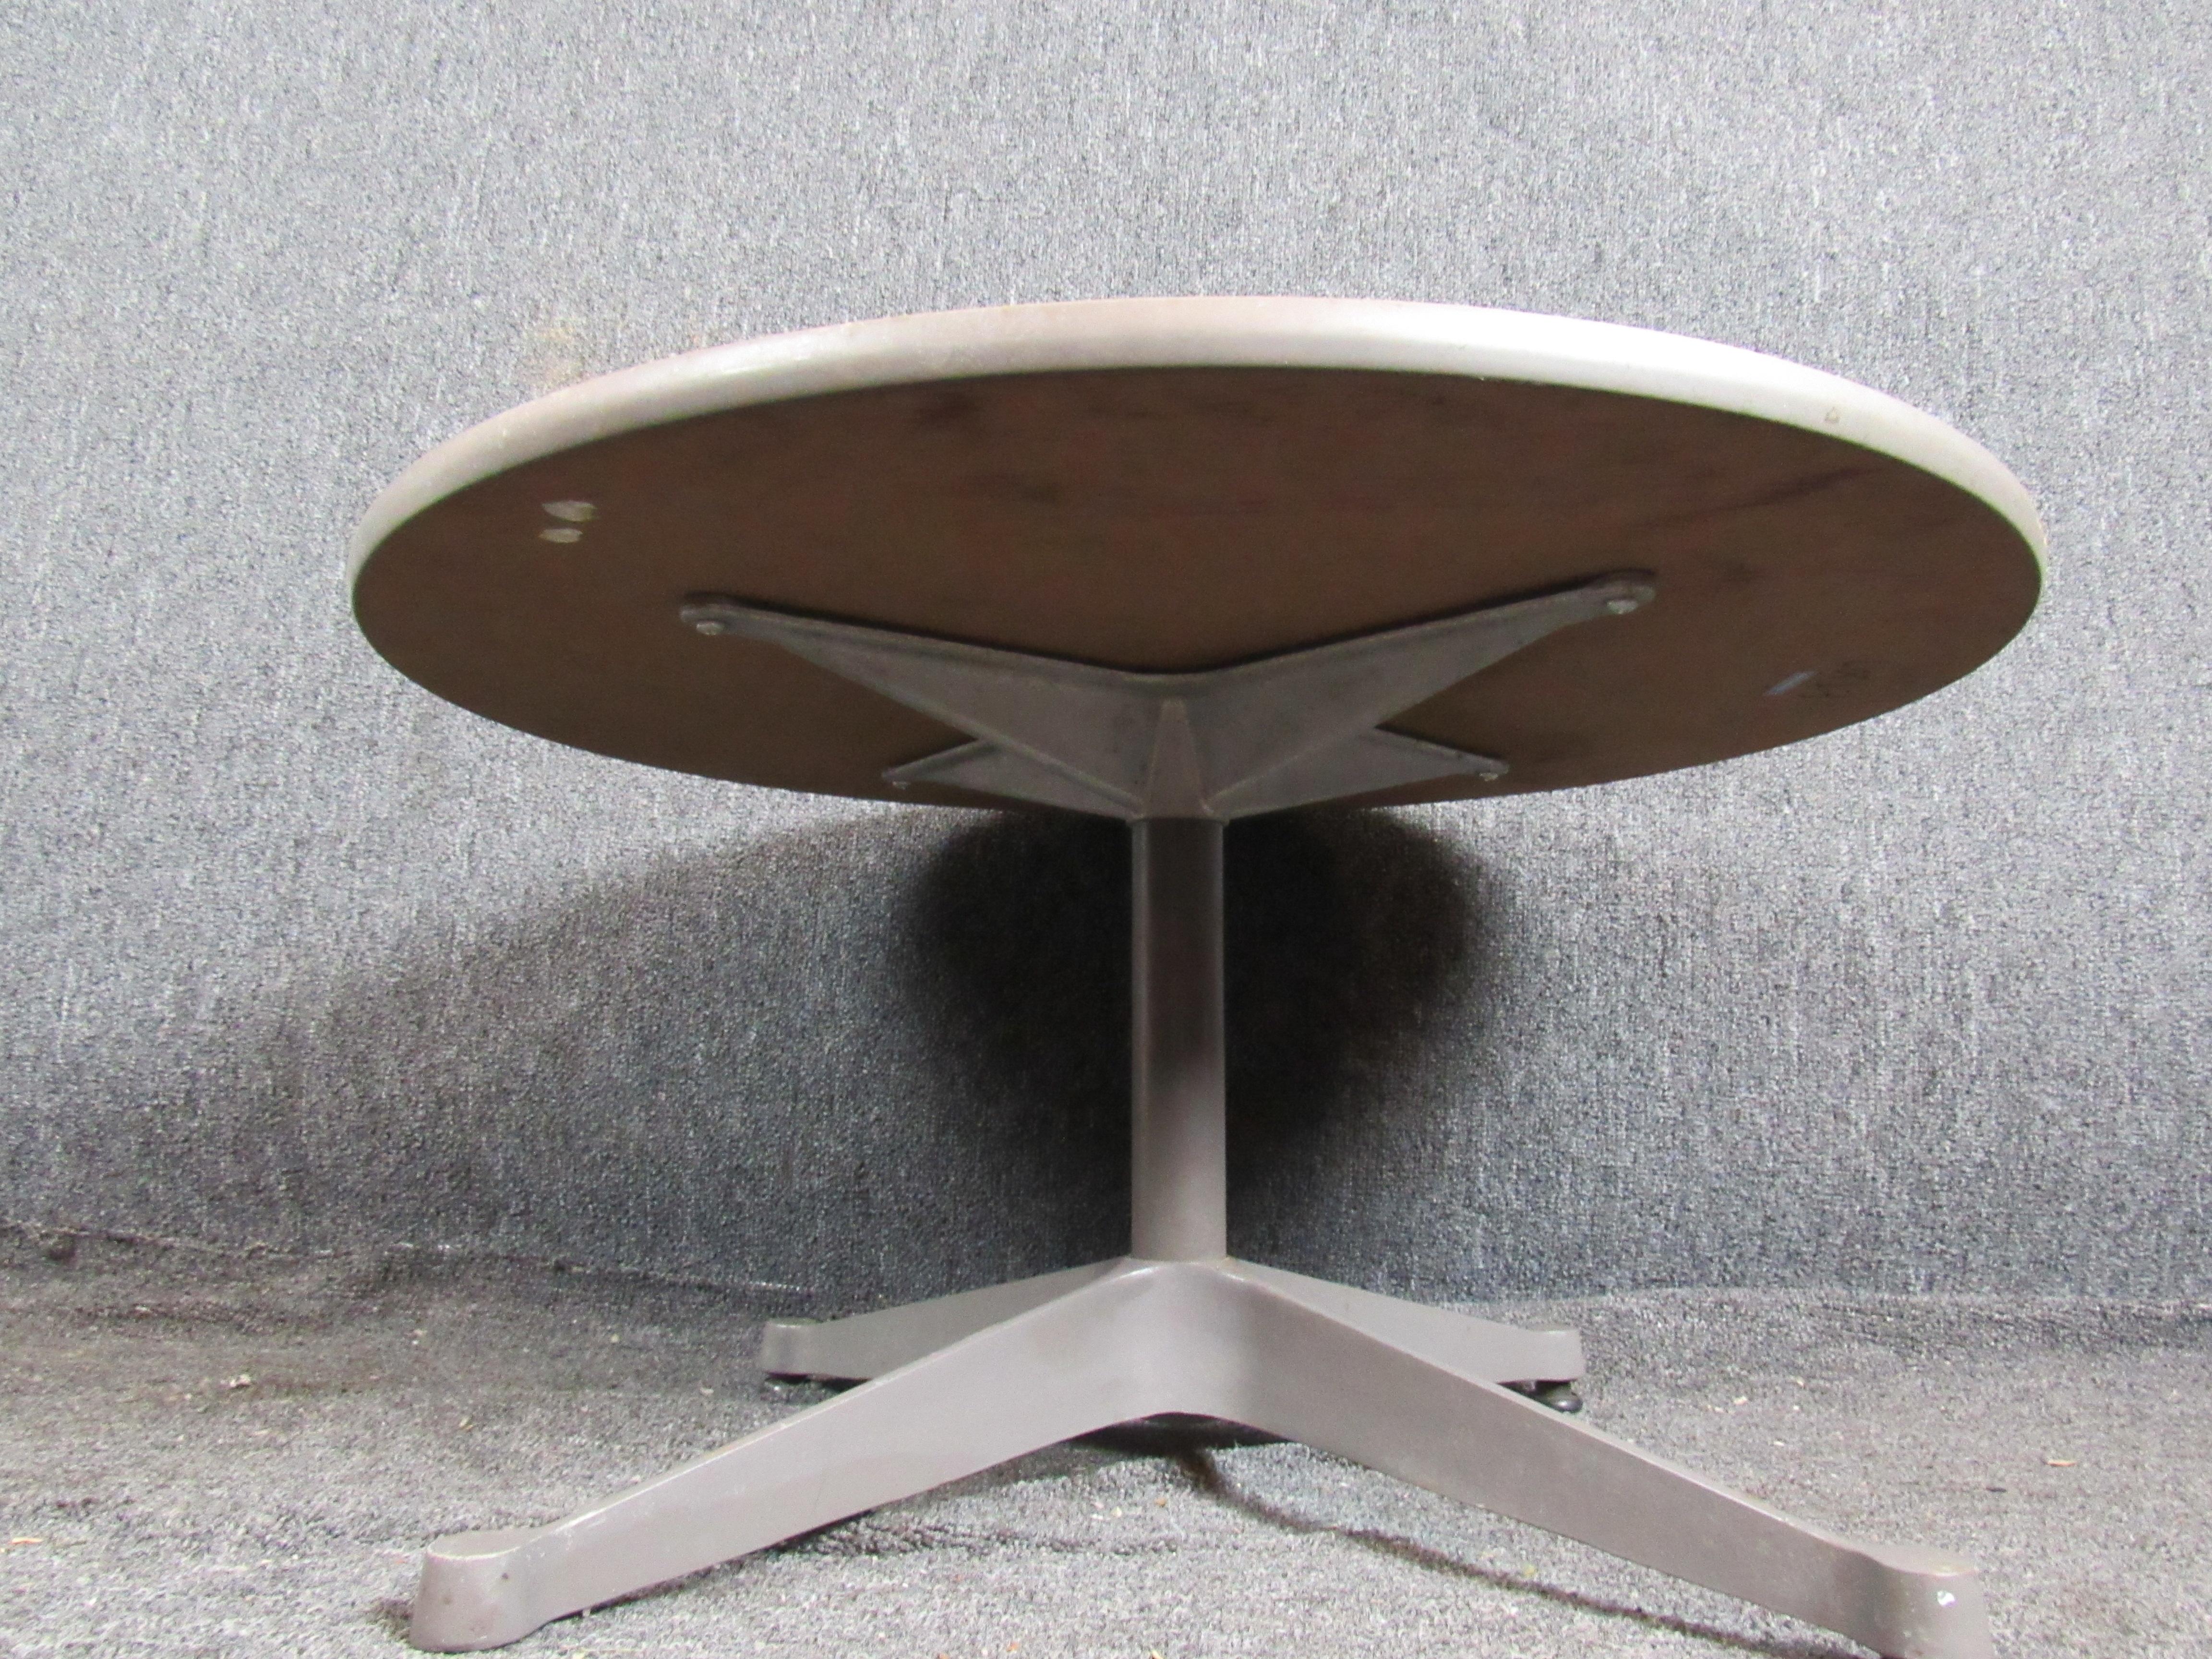 A terrific small, industrial table with any number of uses. Sturdy metal legs and a sizeable 30